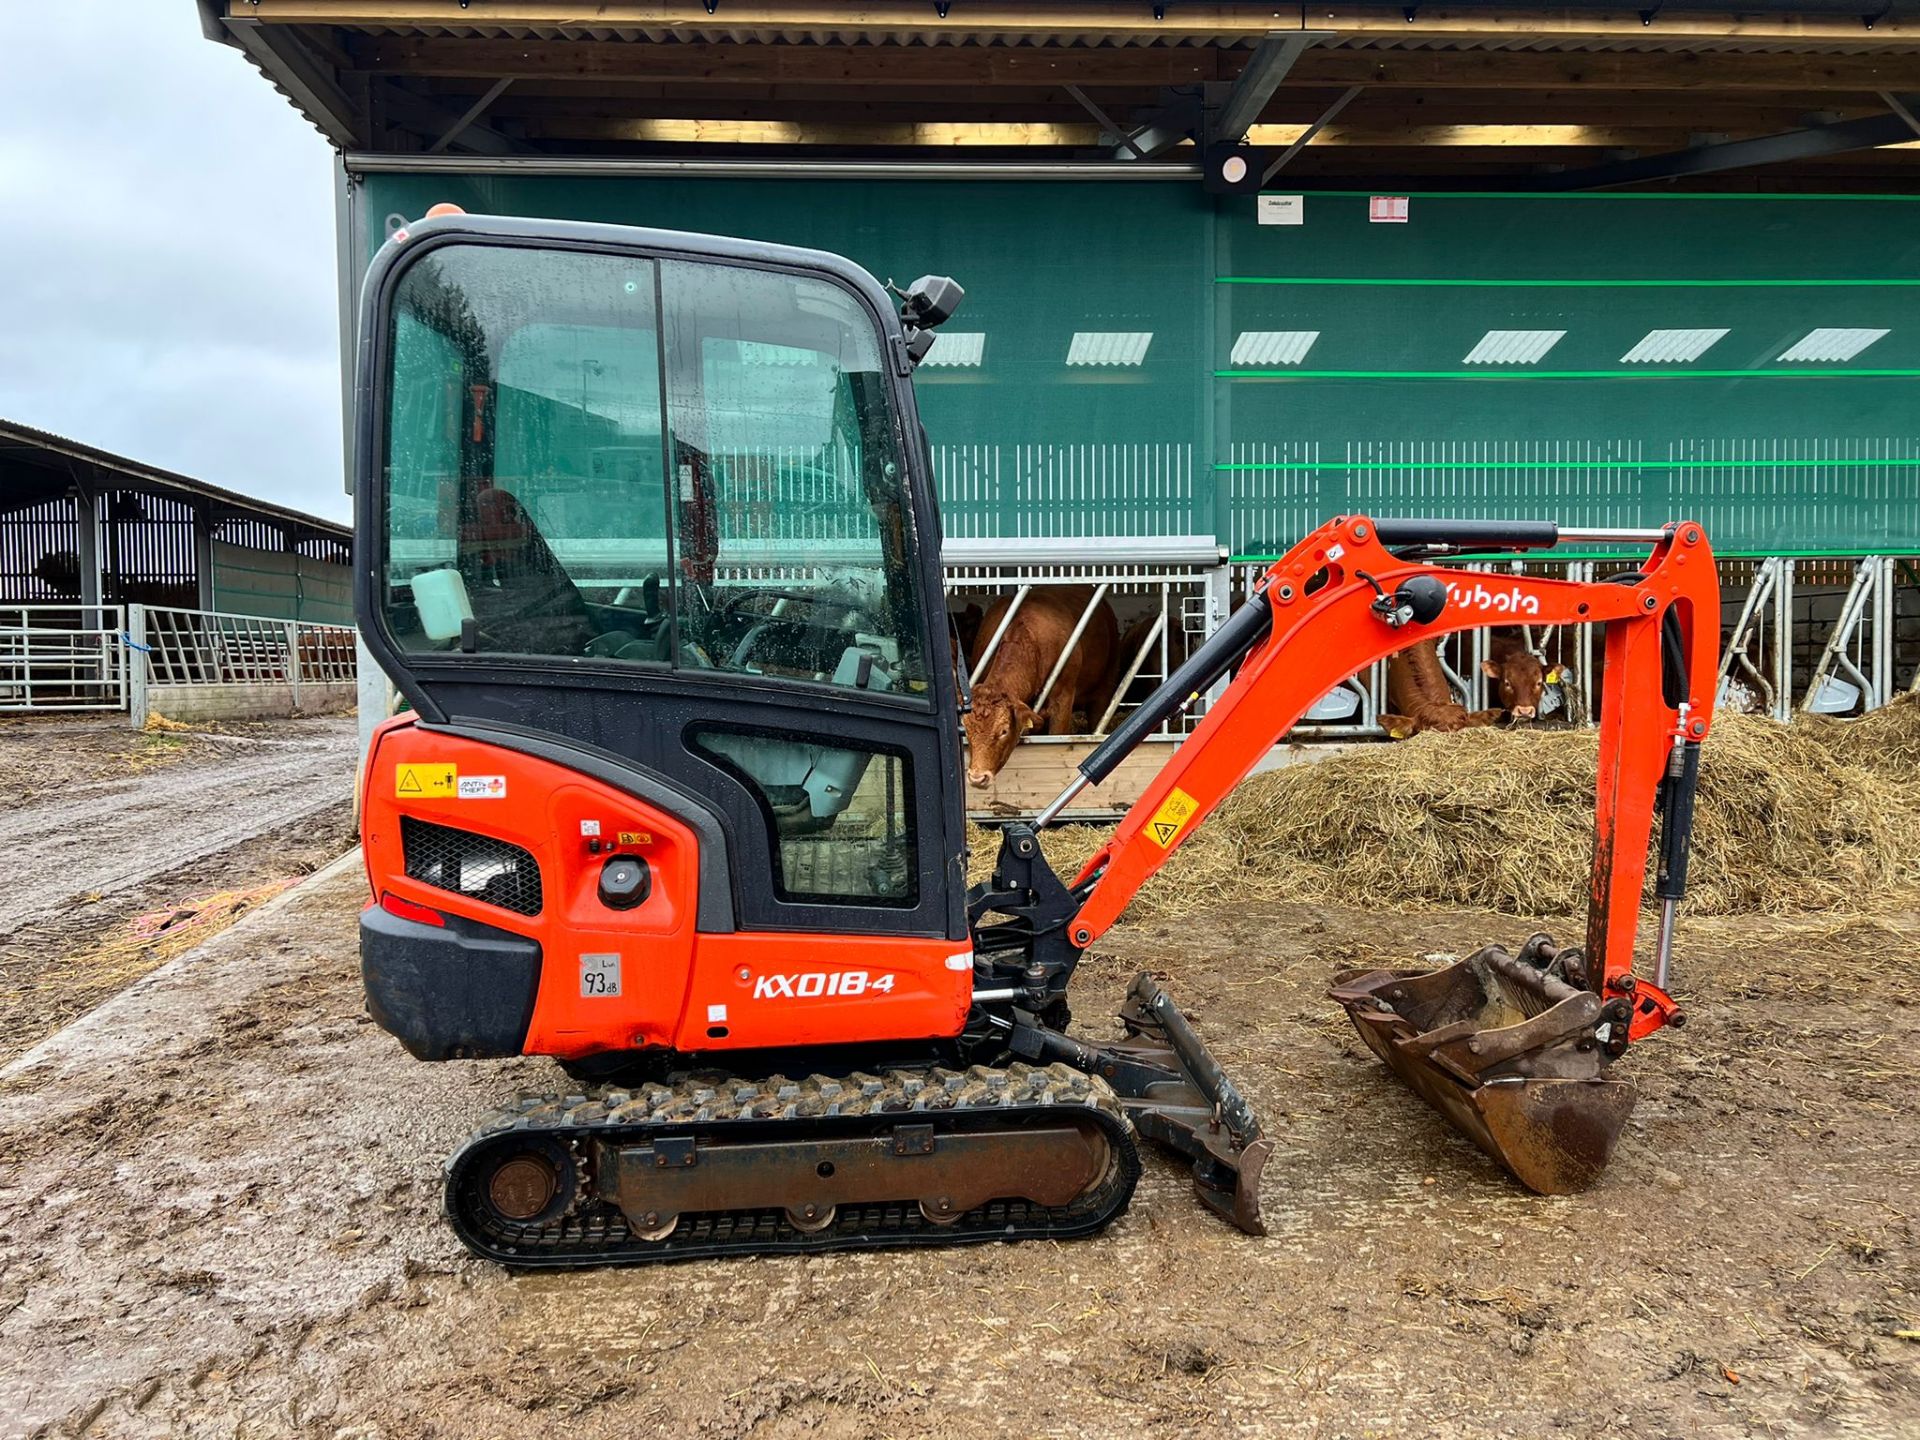 2018 KUBOTA KX018-4 1.8 TON MINI DIGGER, RUNS DRIVES AND DIGS, SHOWING A LOW 1681 HOURS - Image 7 of 20